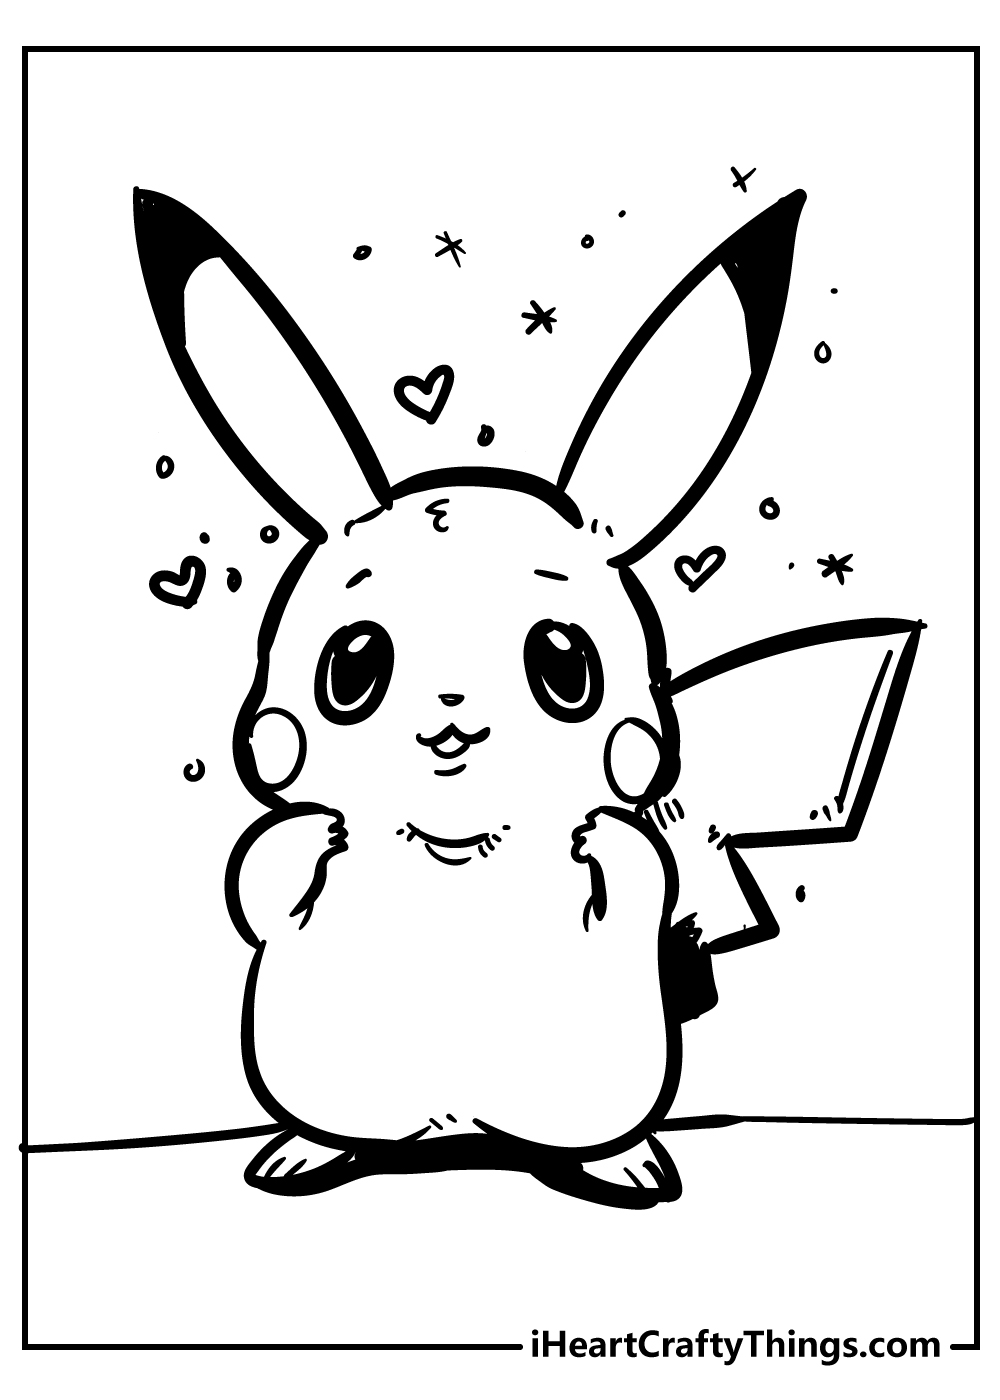 20 Powerful Pikachu Coloring Pages Updated 20